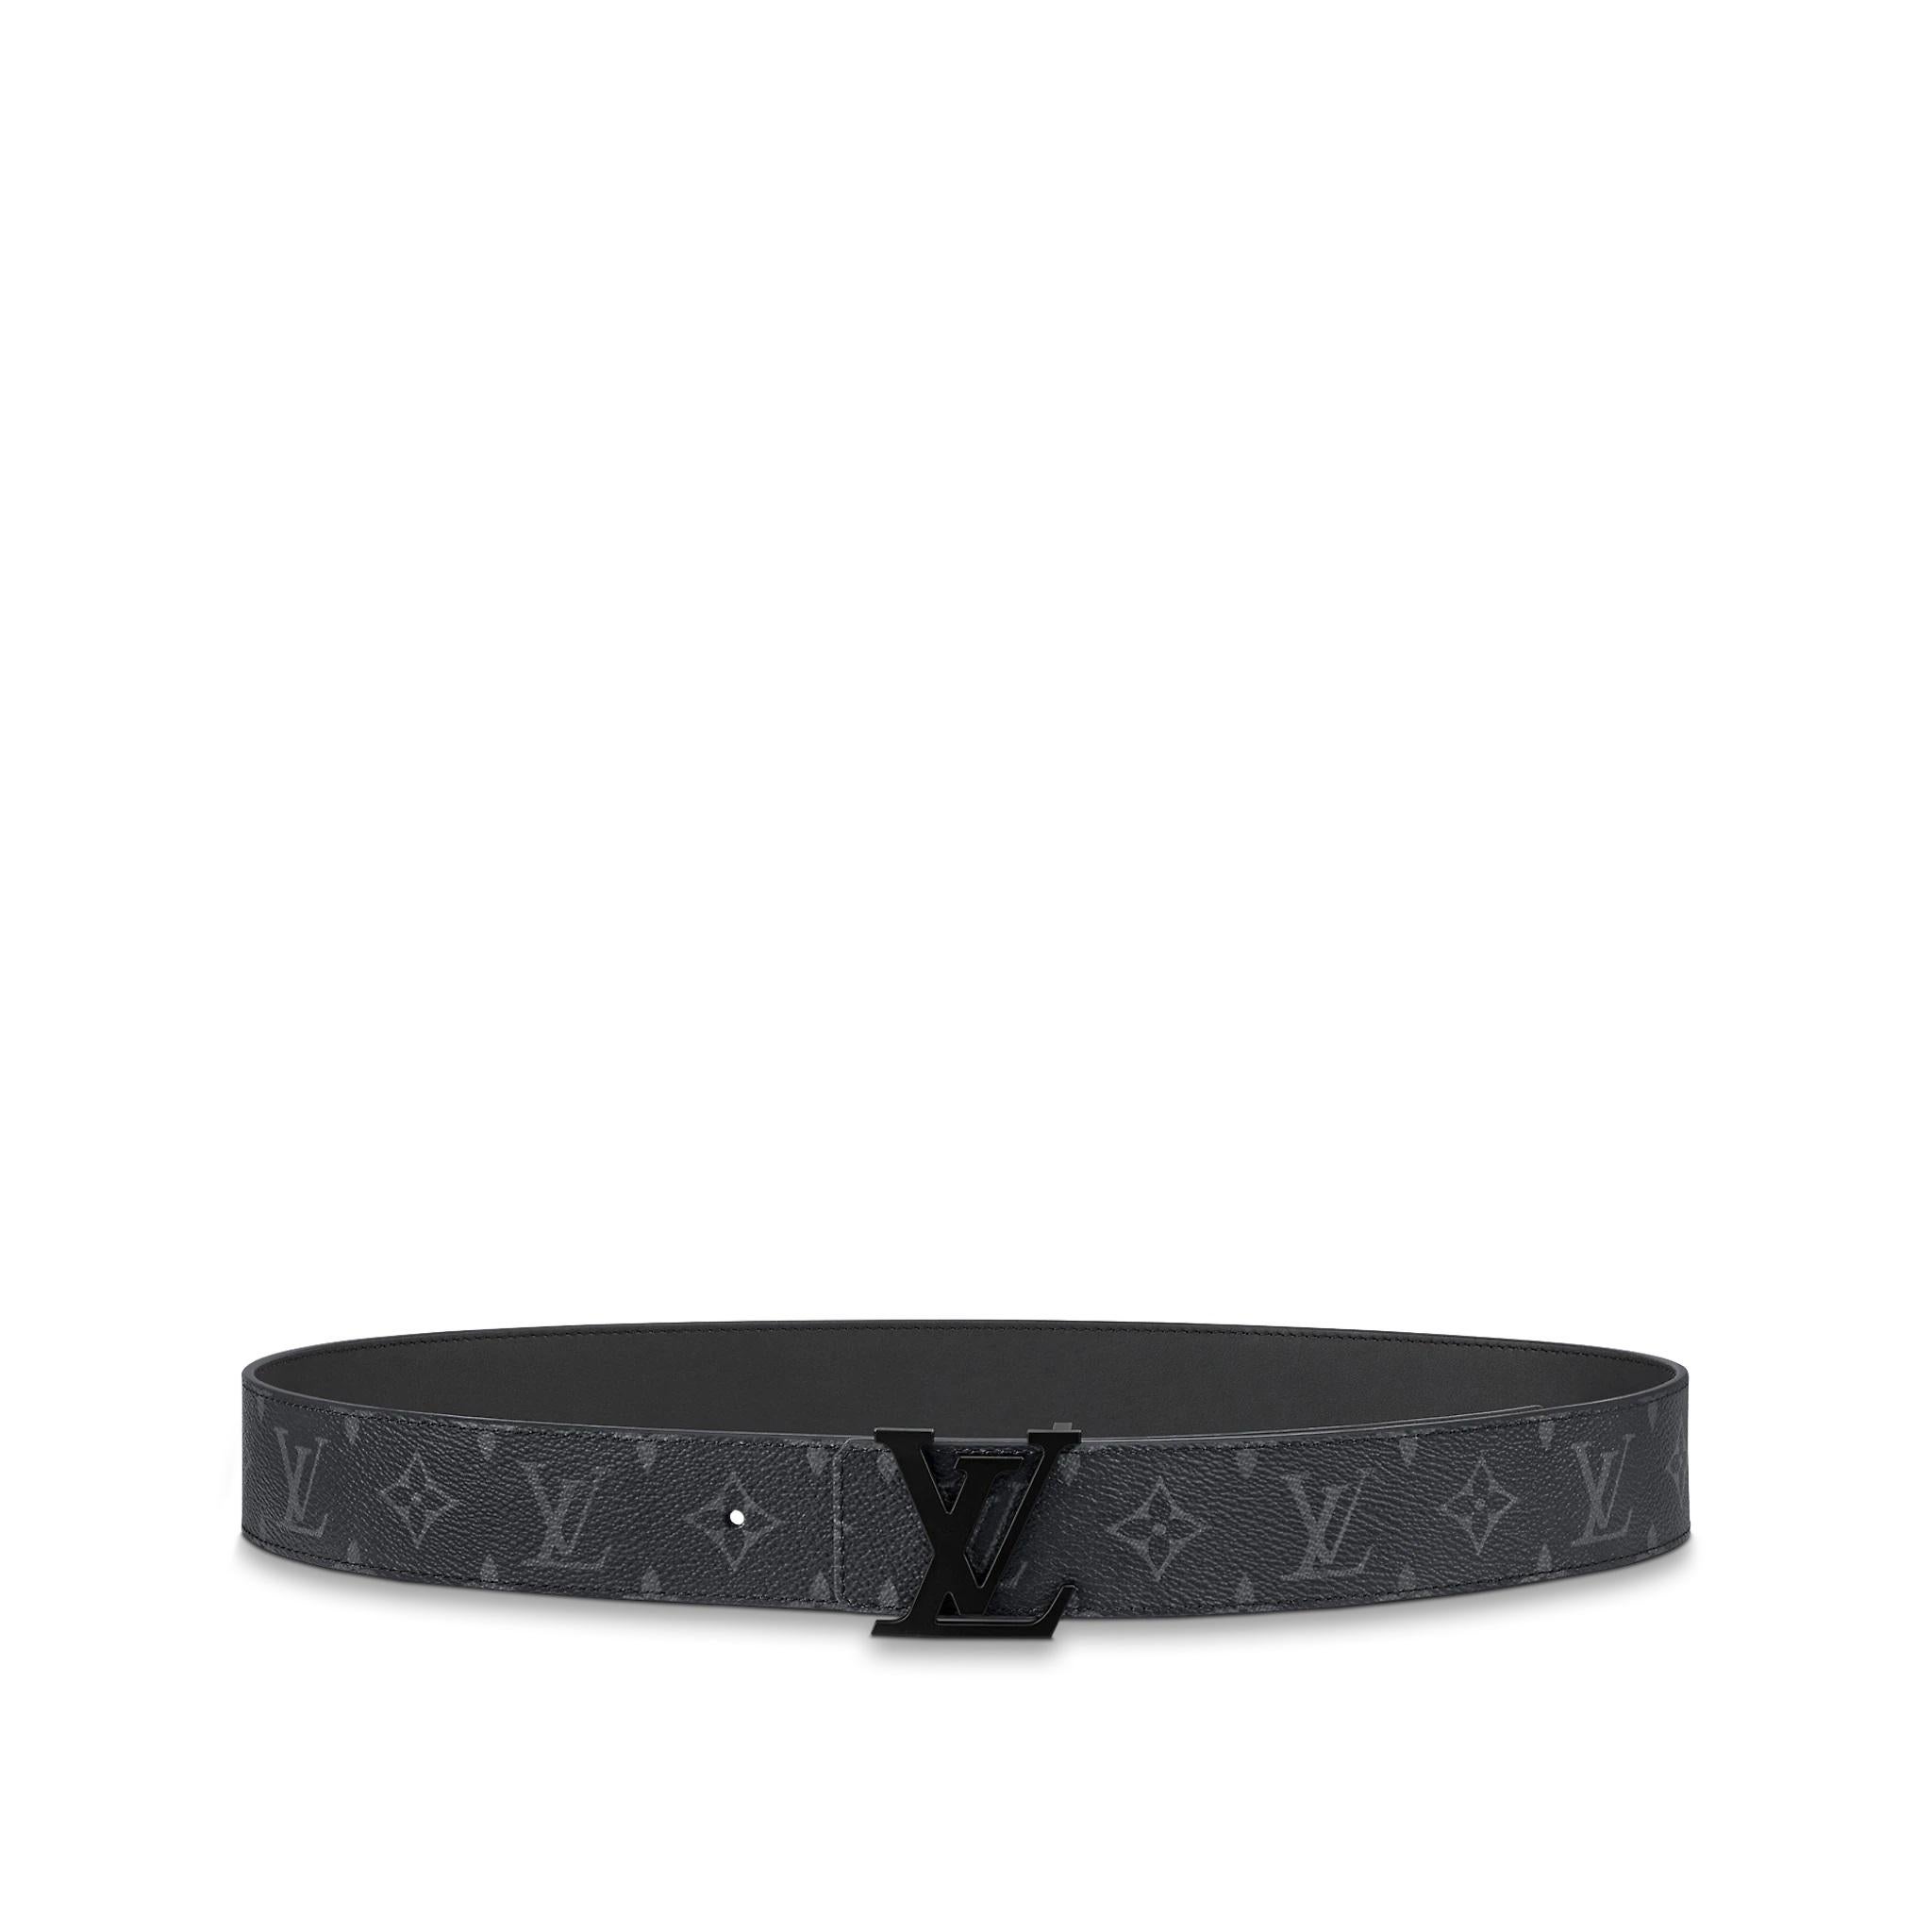 The LV Initials 40mm Matte Black Belt brings effortless elegance to everyday ensembles. This permanent House style is updated with a matte lacquer finish on the LV buckle for a modern look. A highly wearable piece, it is immaculately crafted from